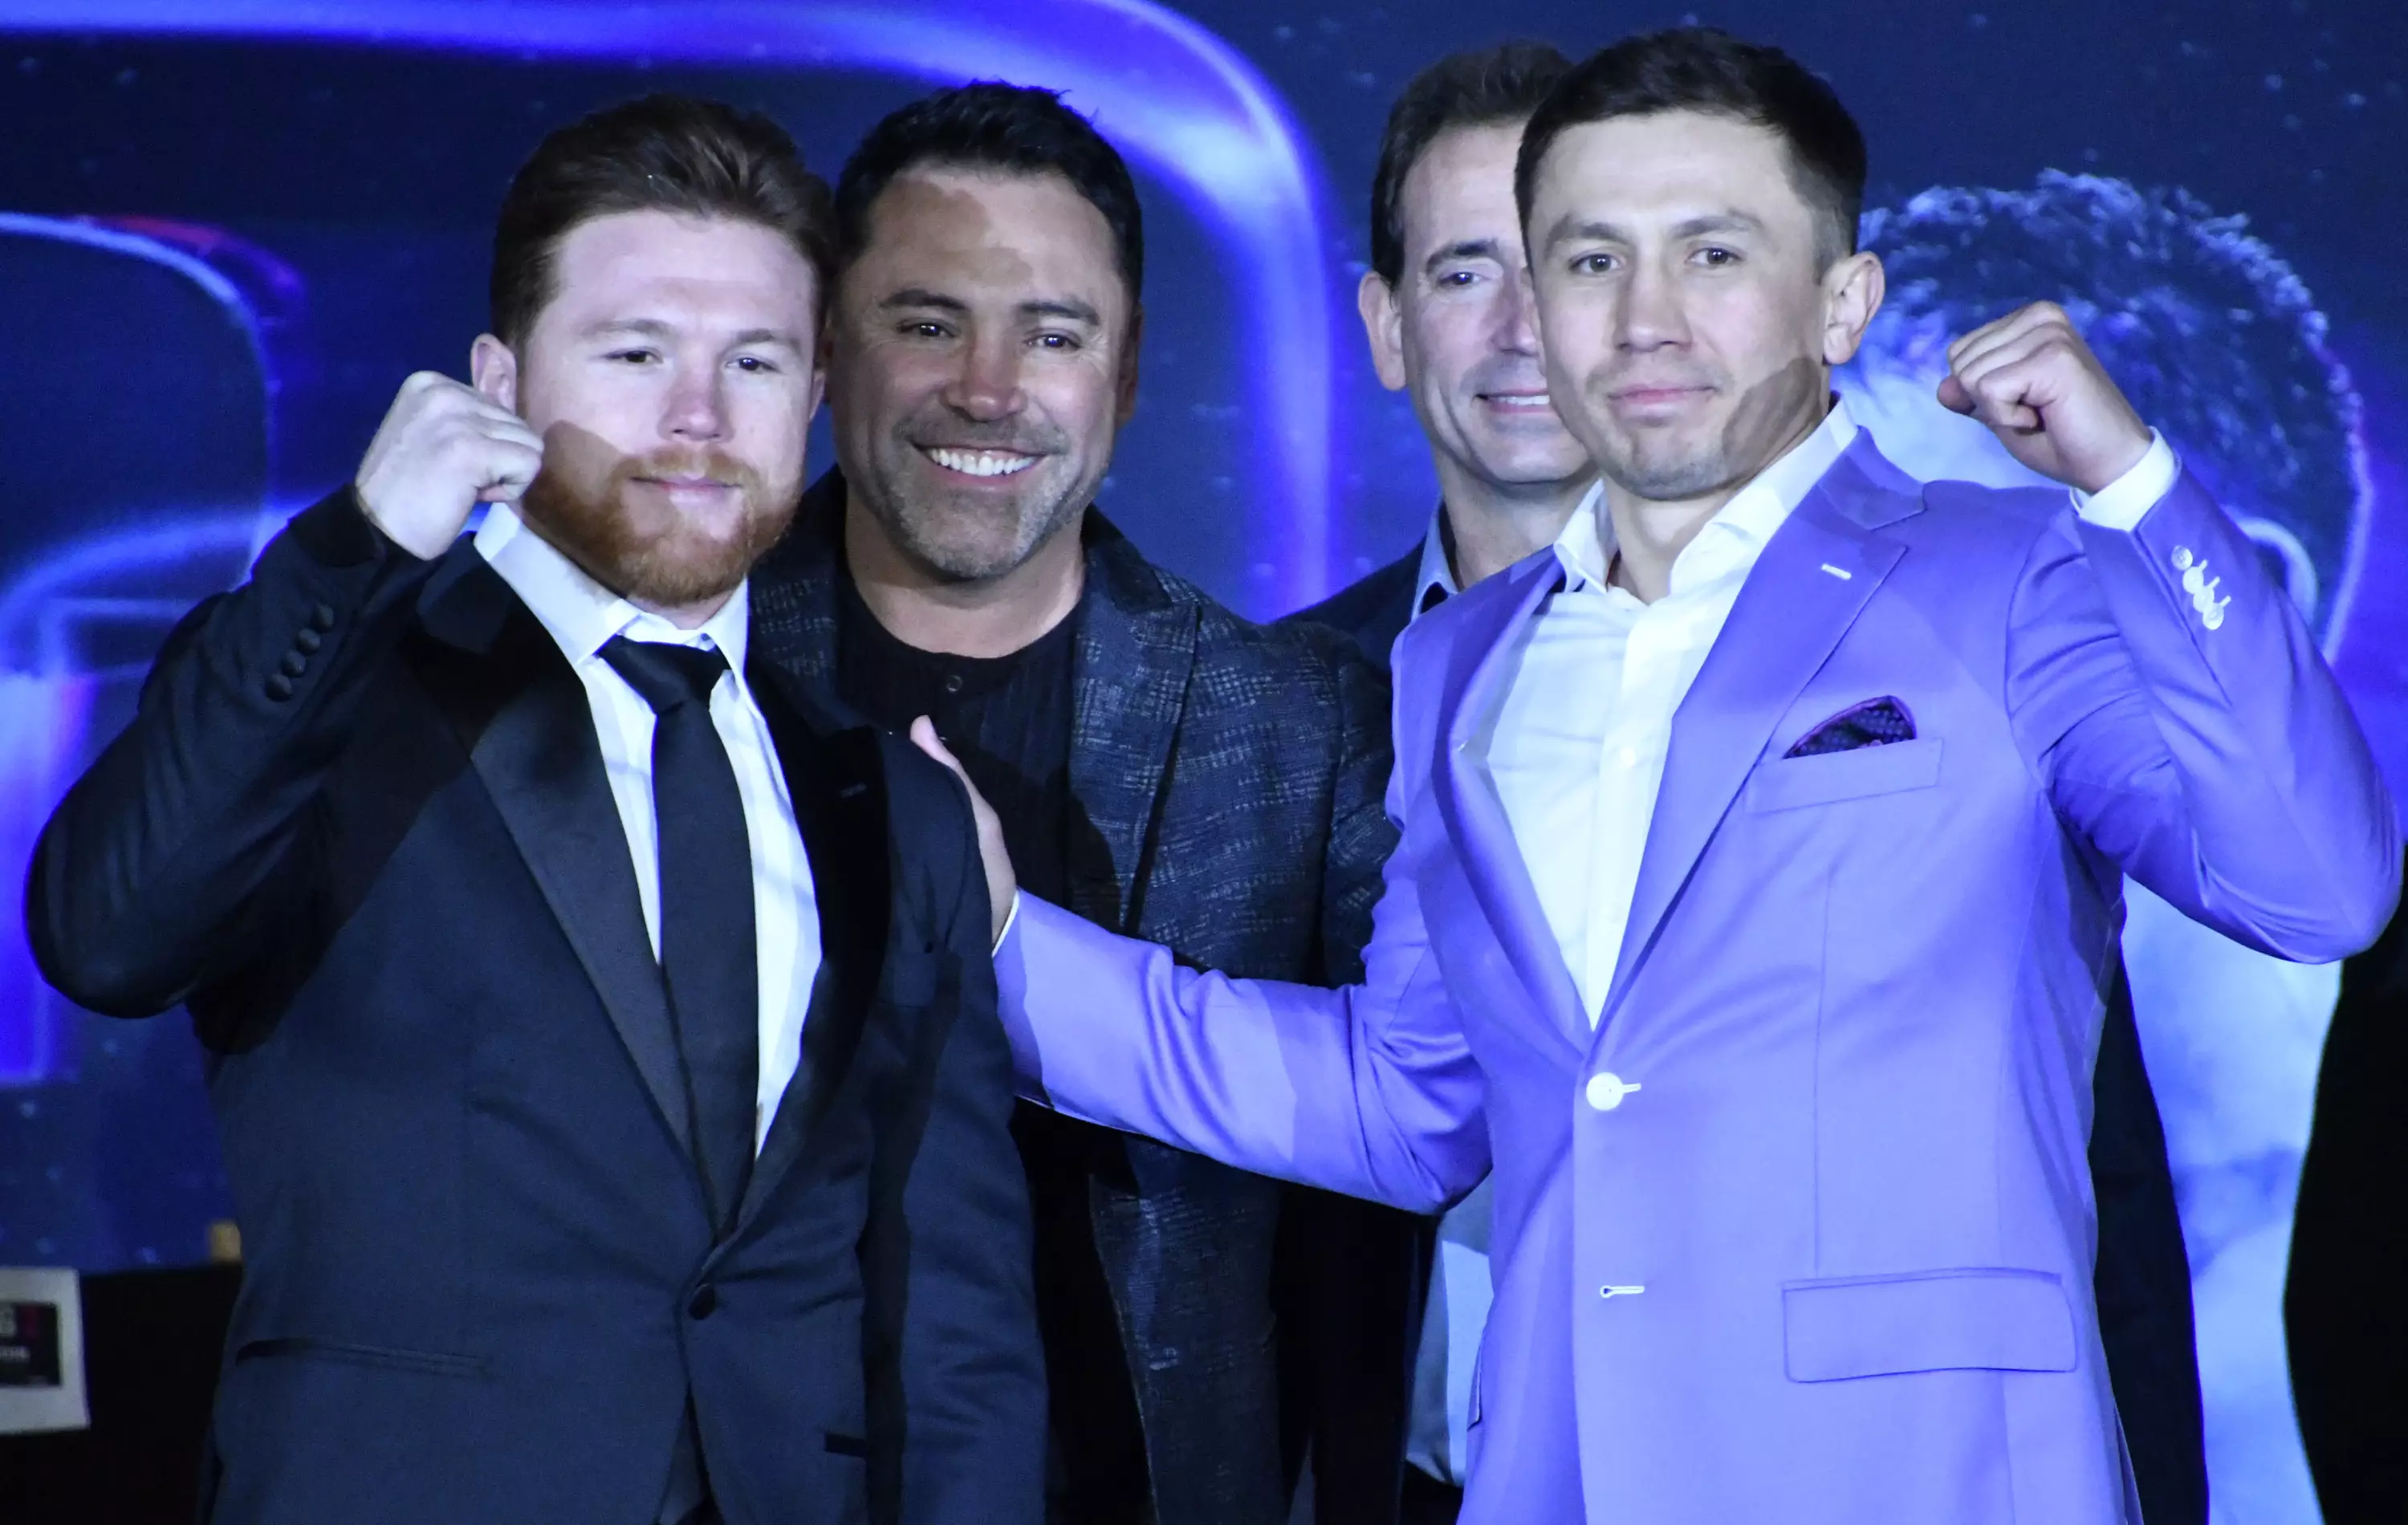 'Canelo' and 'GGG' pose for photos. Image: PA